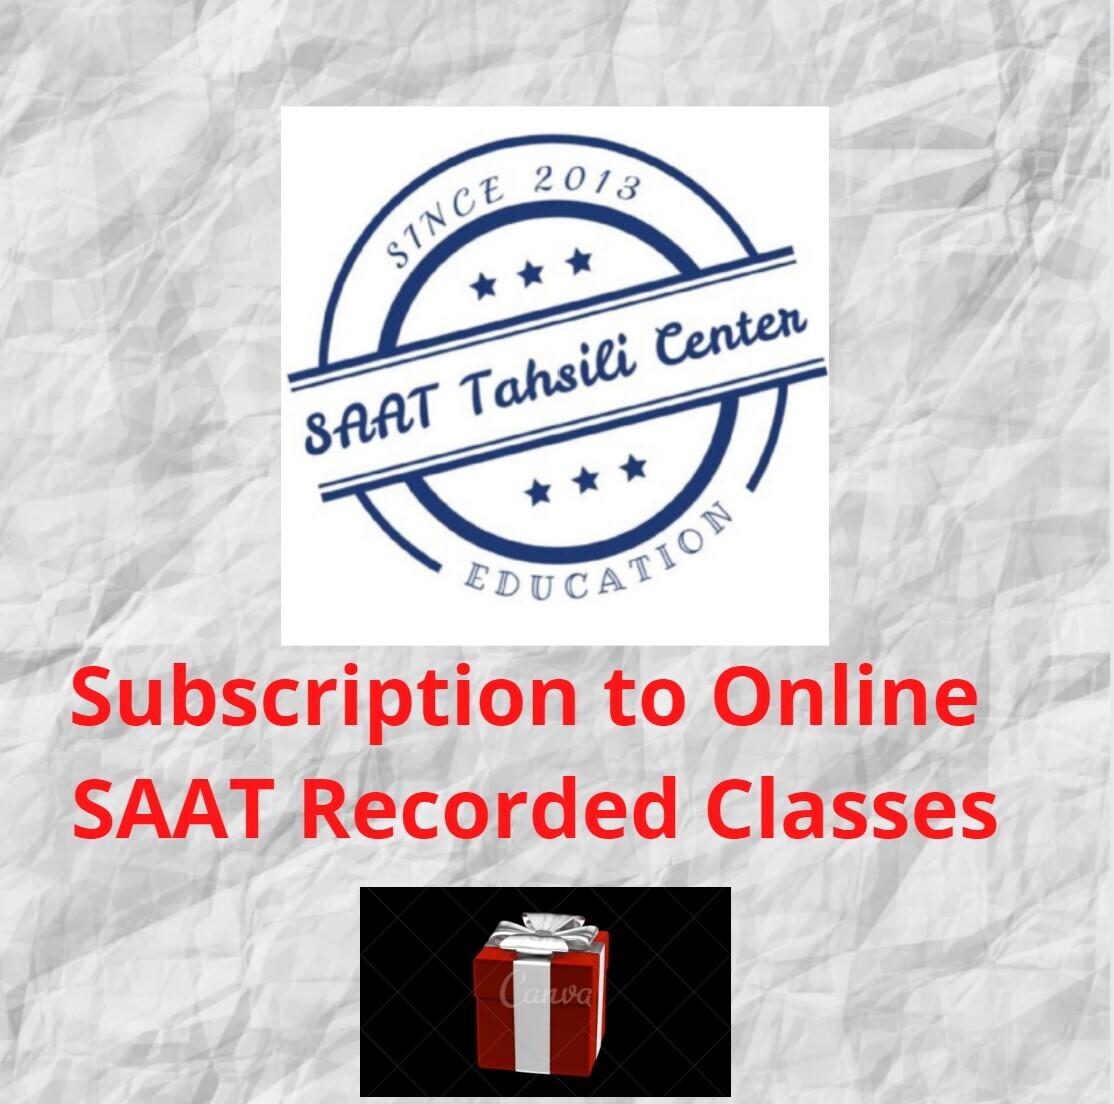 Subscription to Online SAAT Recorded Classes